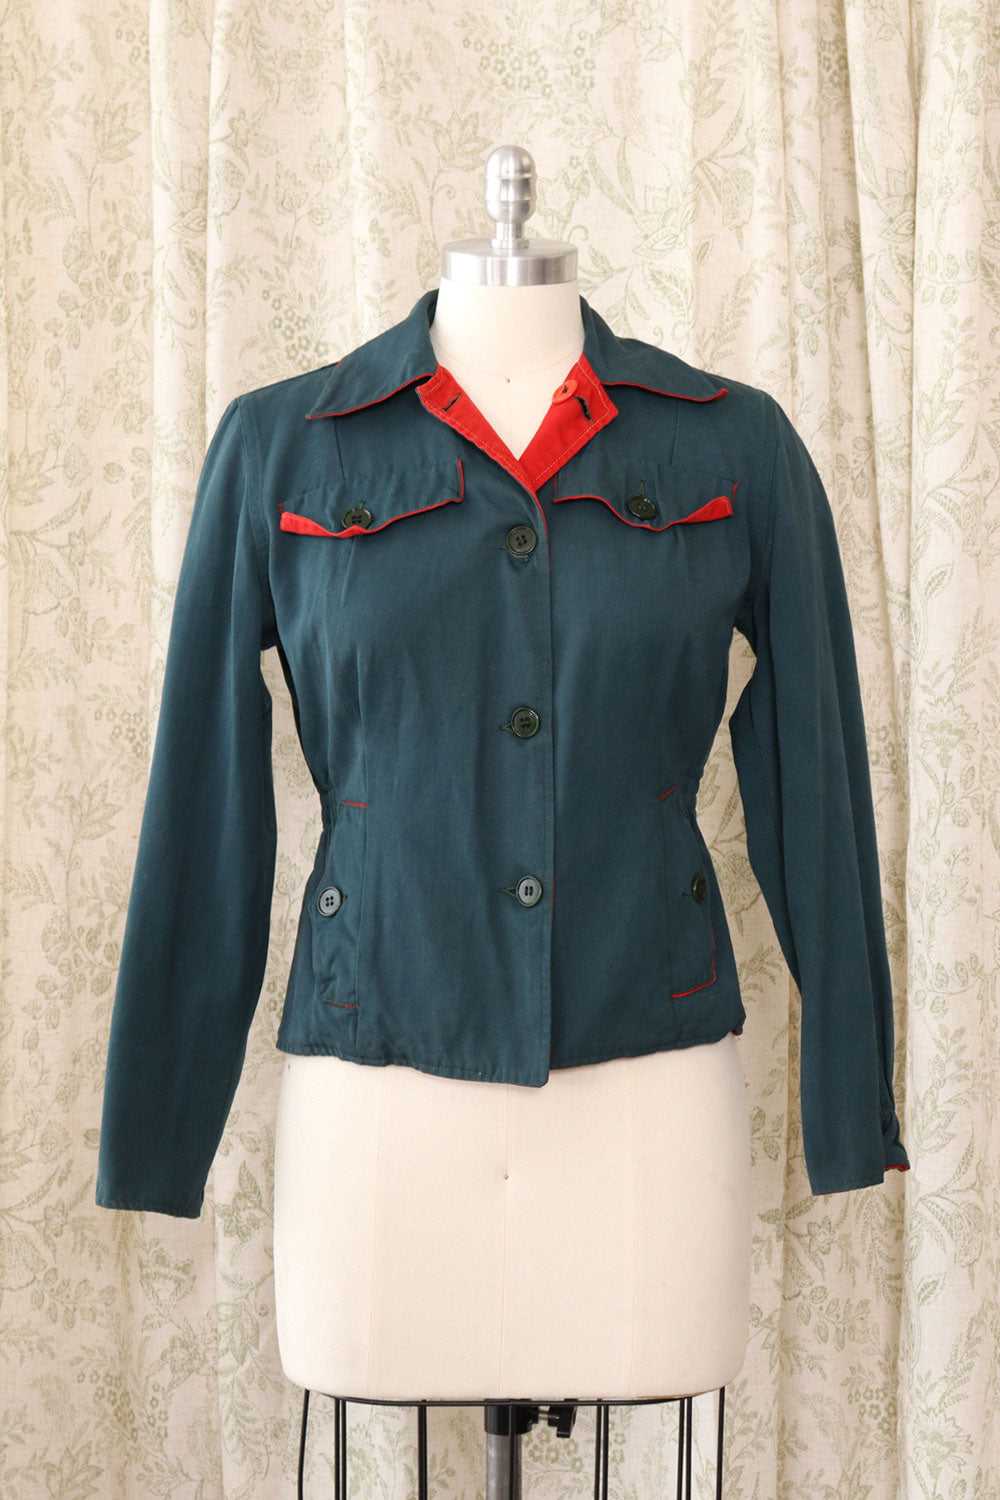 Reversible Red/Green Cropped Jacket XS/S - image 1